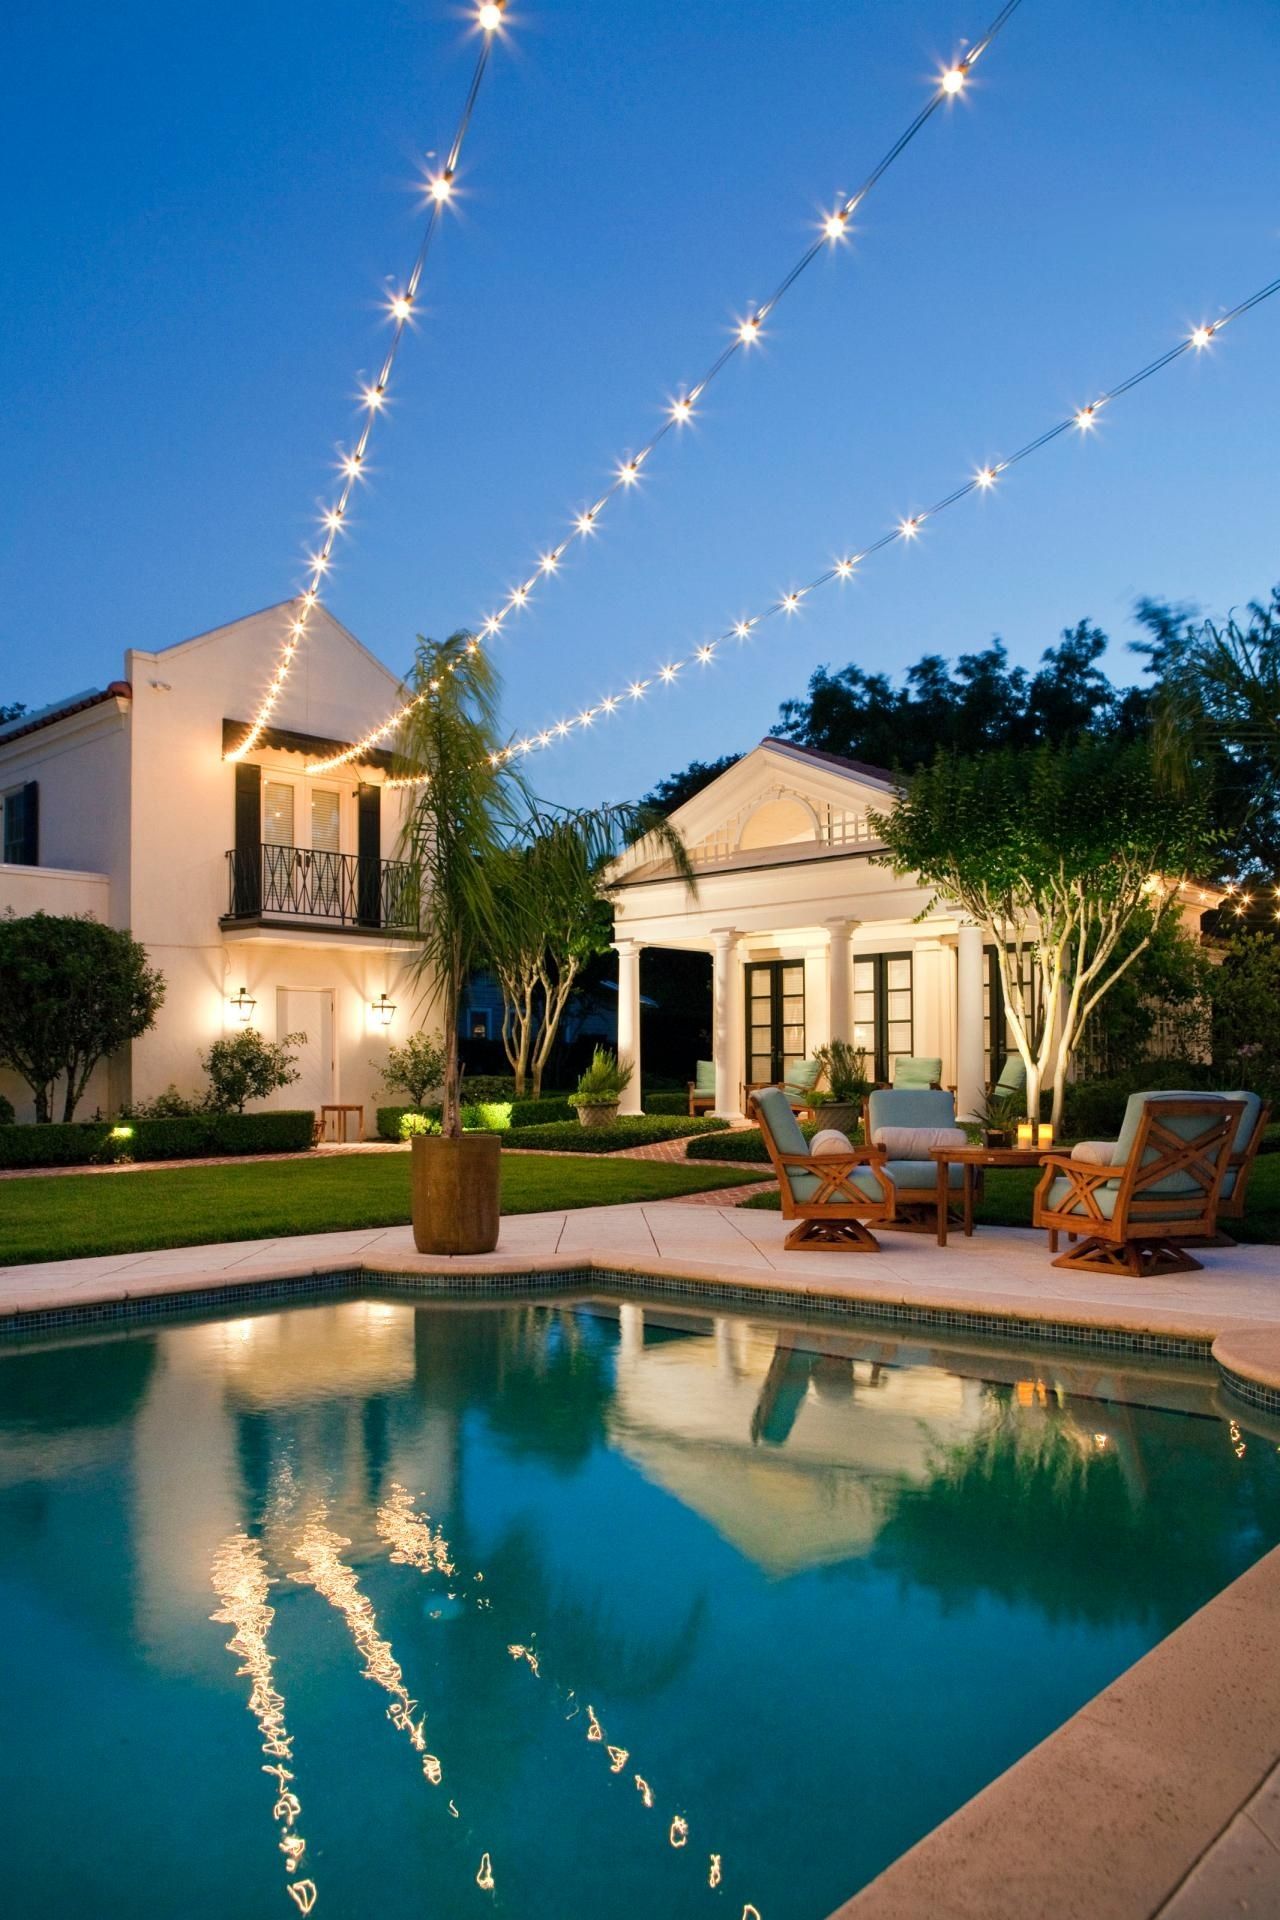 10 Ways To Amp Up Your Outdoor Space With String Lights | Hgtv's For Outdoor Hanging String Lanterns (Photo 10 of 15)